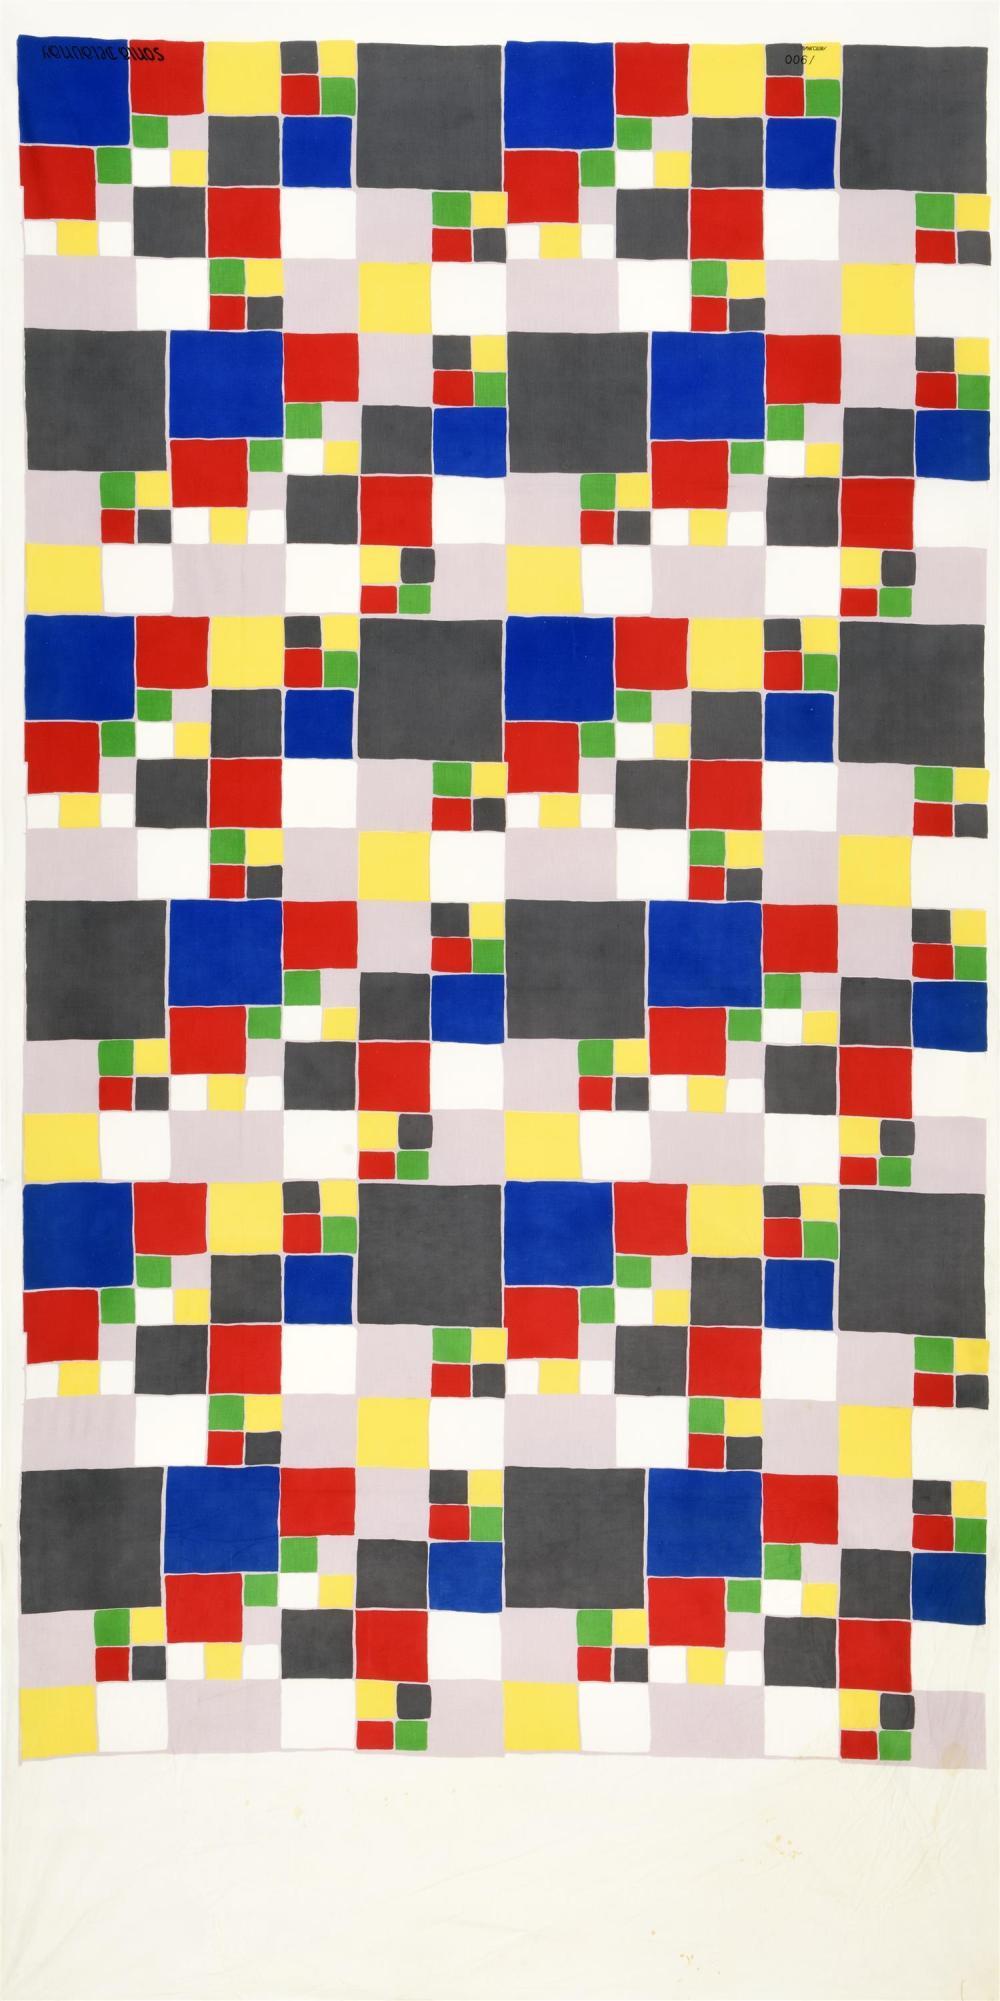 Sonia Delaunay 
polychrome of squares 
Silkscreen on fabric
Bianchini Férier for Artcurial
Signed and numbered on 900
Circa 1975
285 x 150 cms
1700 euros 
3 available